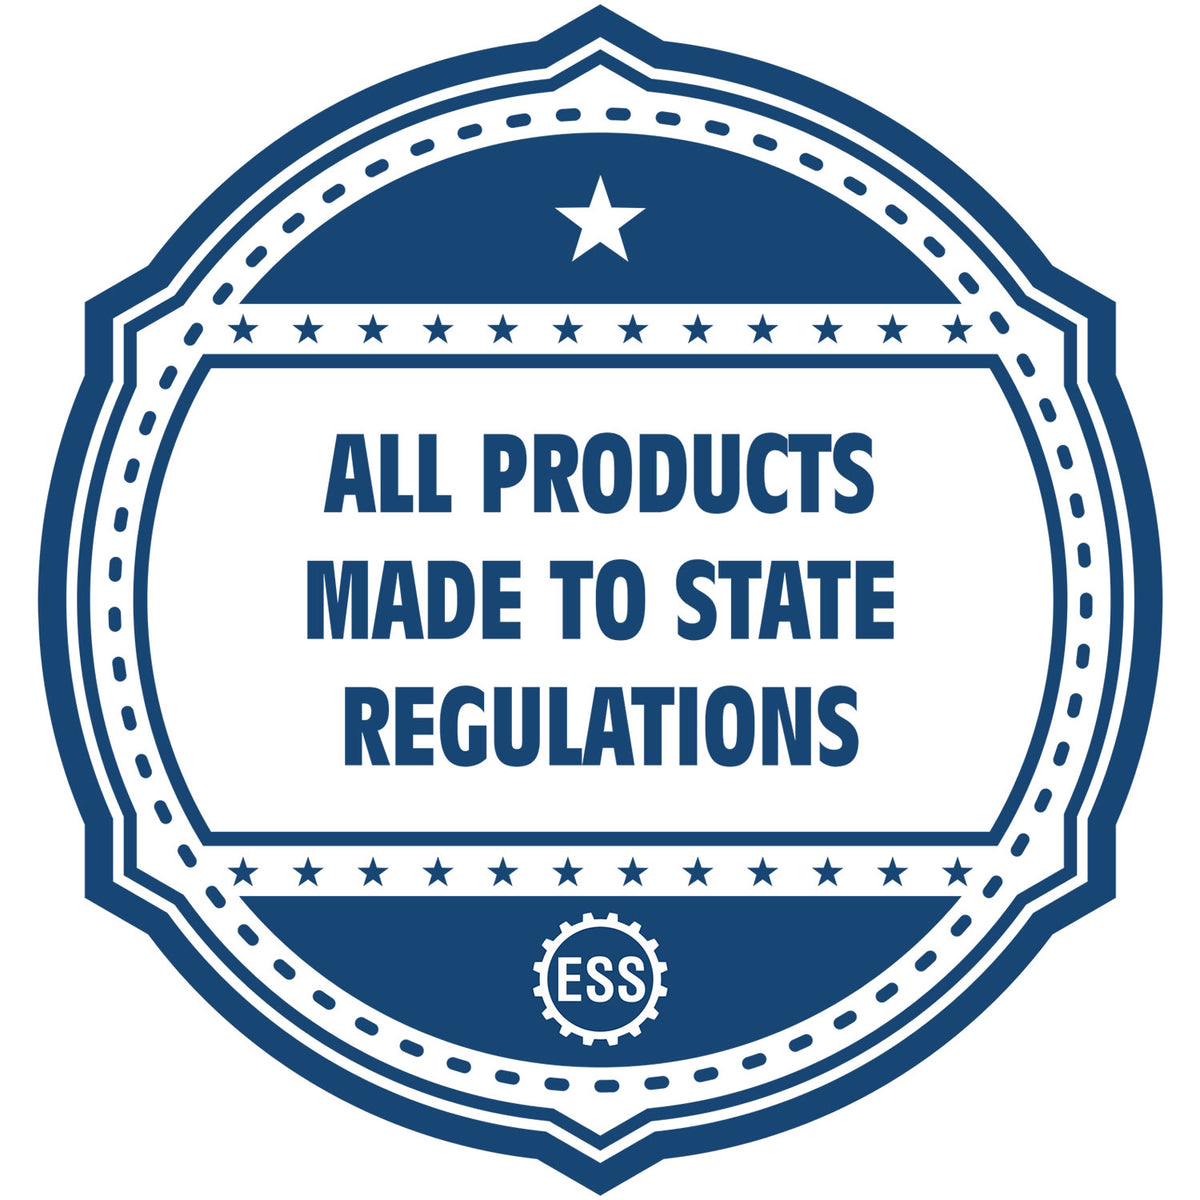 An icon or badge element for the Heavy-Duty Pennsylvania Rectangular Notary Stamp showing that this product is made in compliance with state regulations.